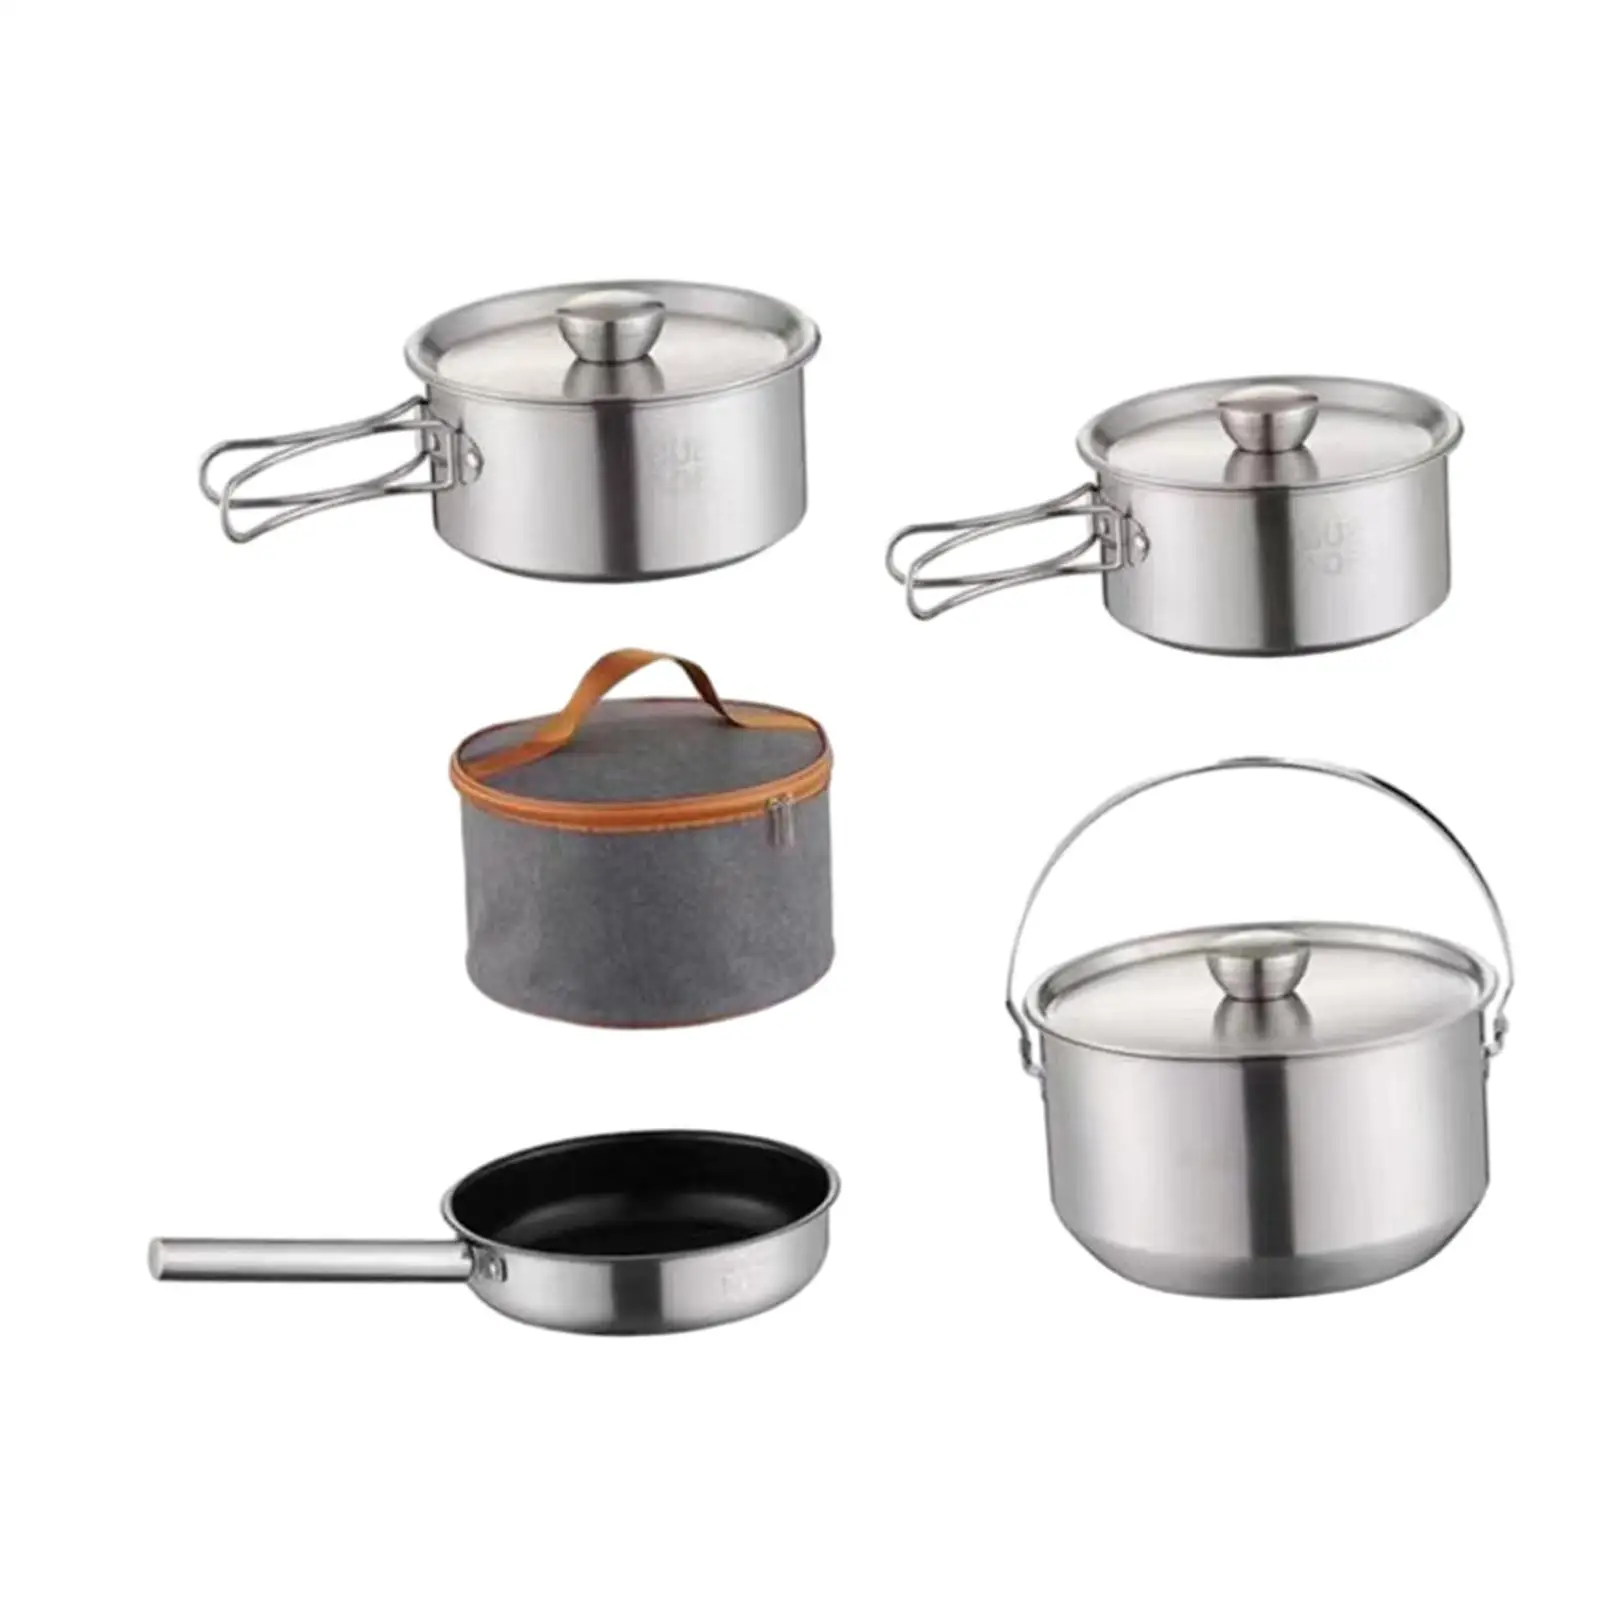 Camping Cookware Kit Outdoor Pot Nonstick Portable Utensils Cookset Cooking Set for Travel Backpacking Kitchen Indoors Hiking